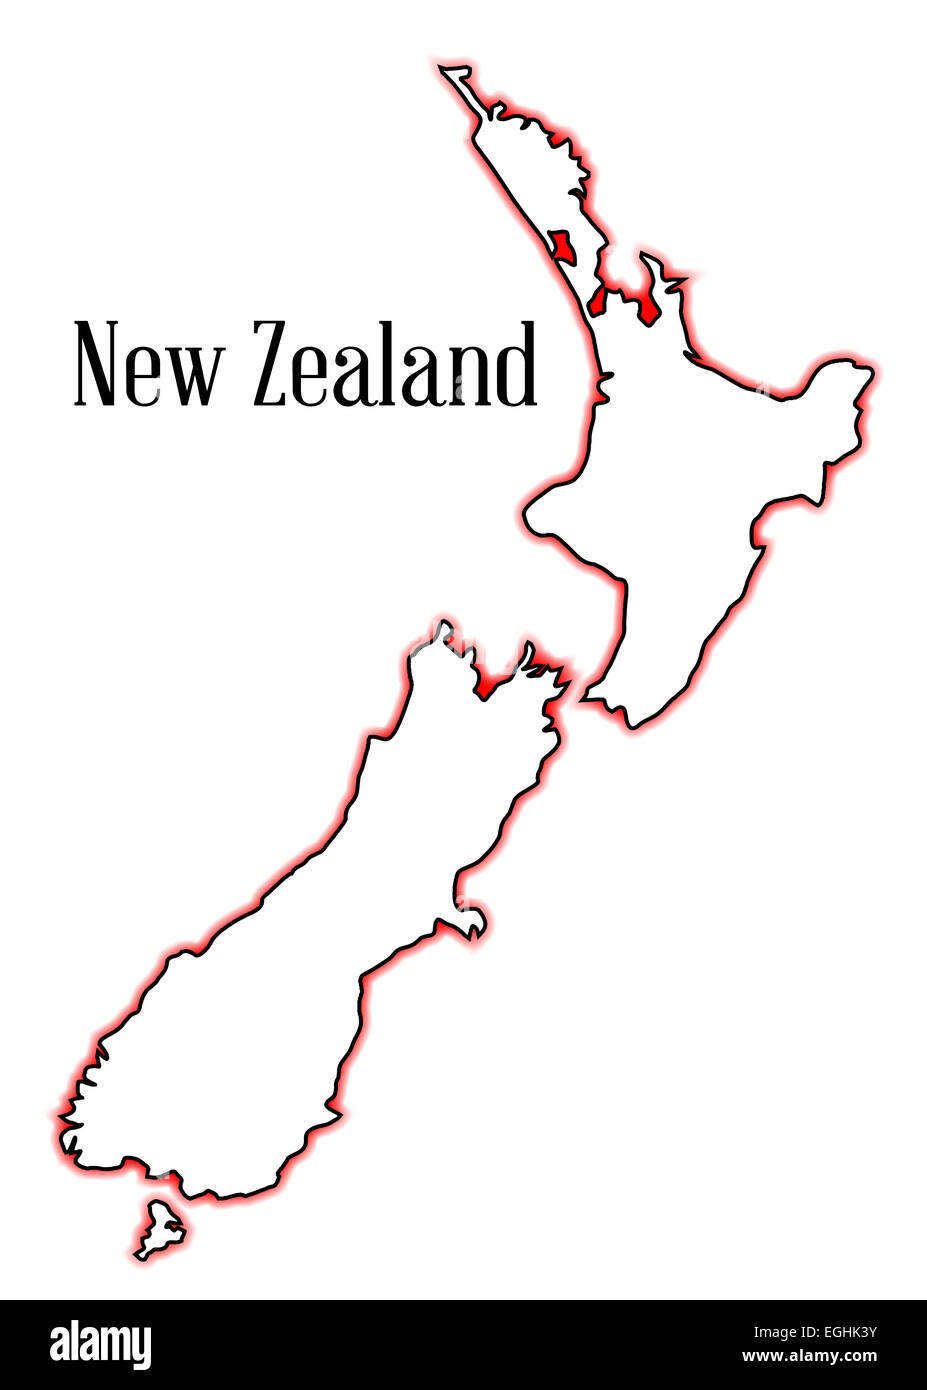 An outline map of New Zealand in red and black Stock Photo